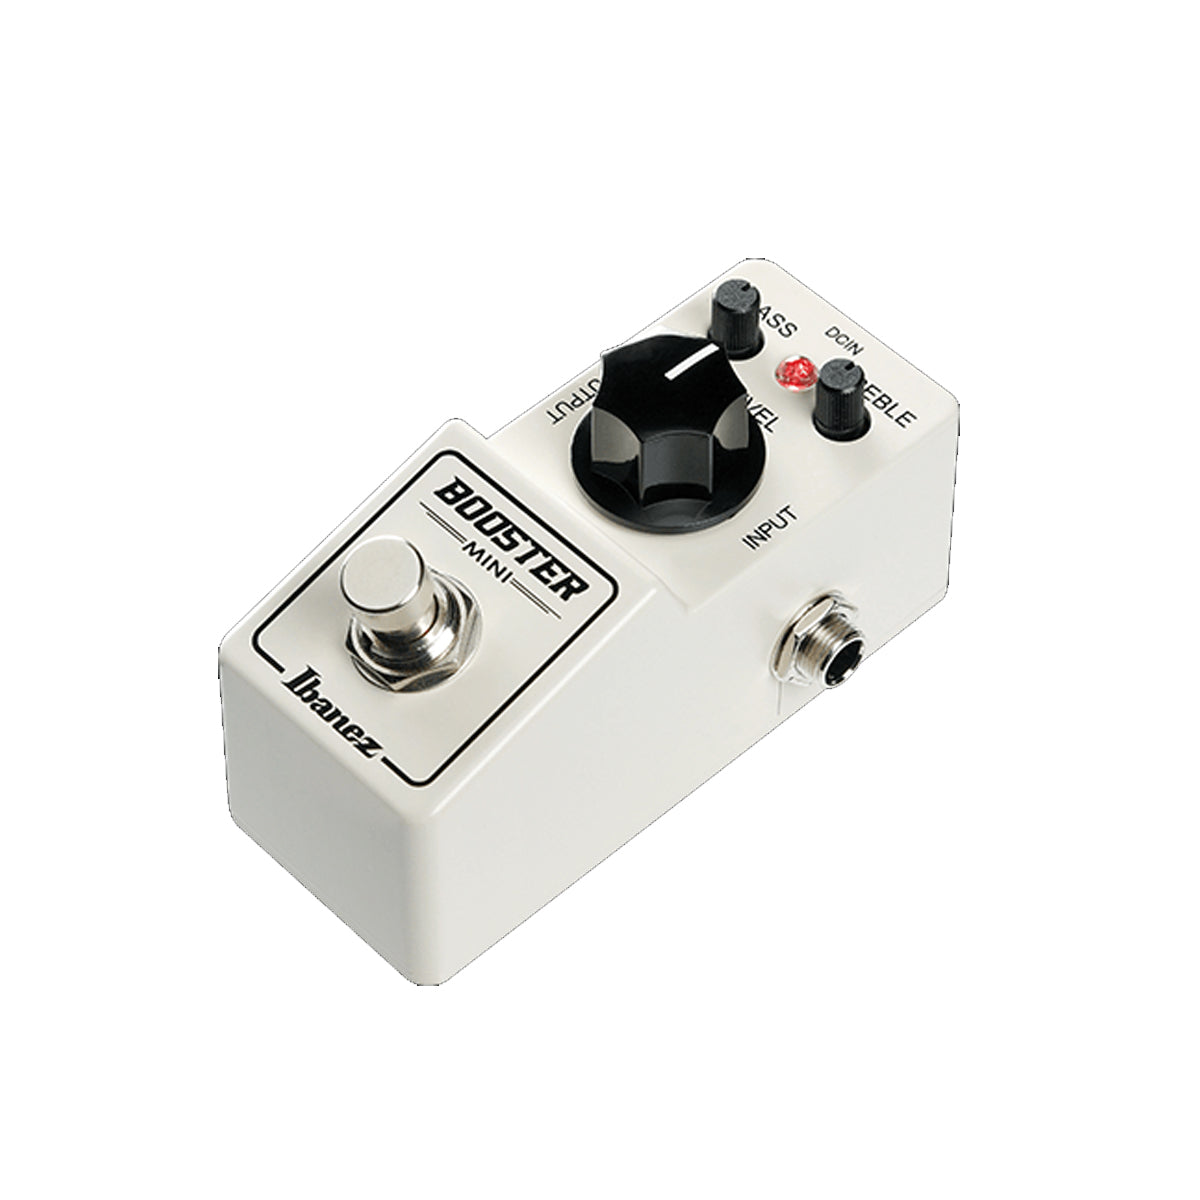 Ibanez BTMINI Mini Booster Effects Pedal